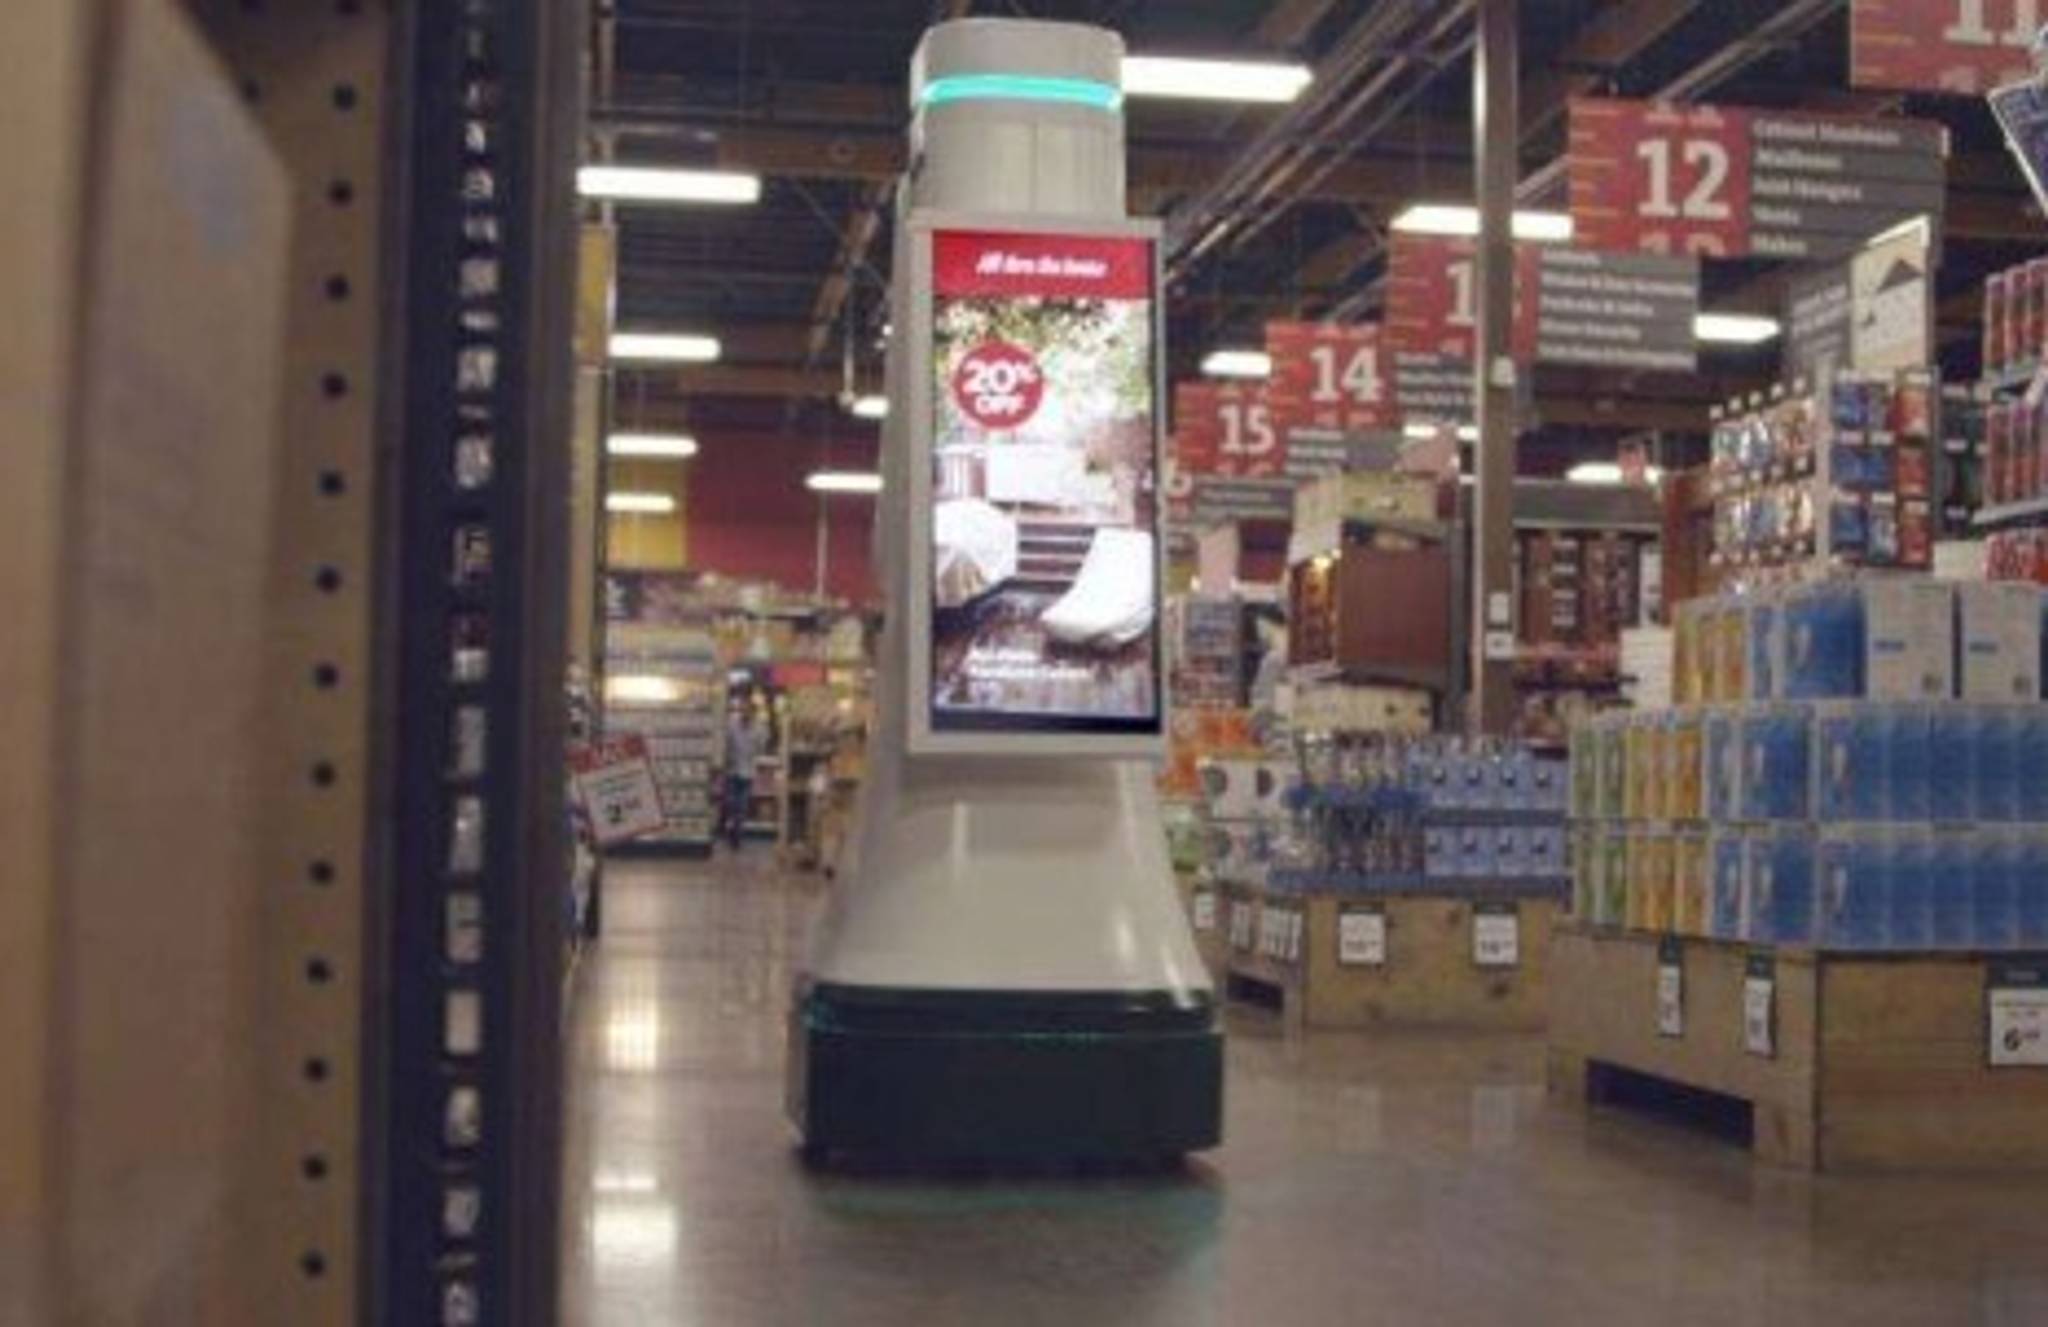 Retail robots serving people in Lowes